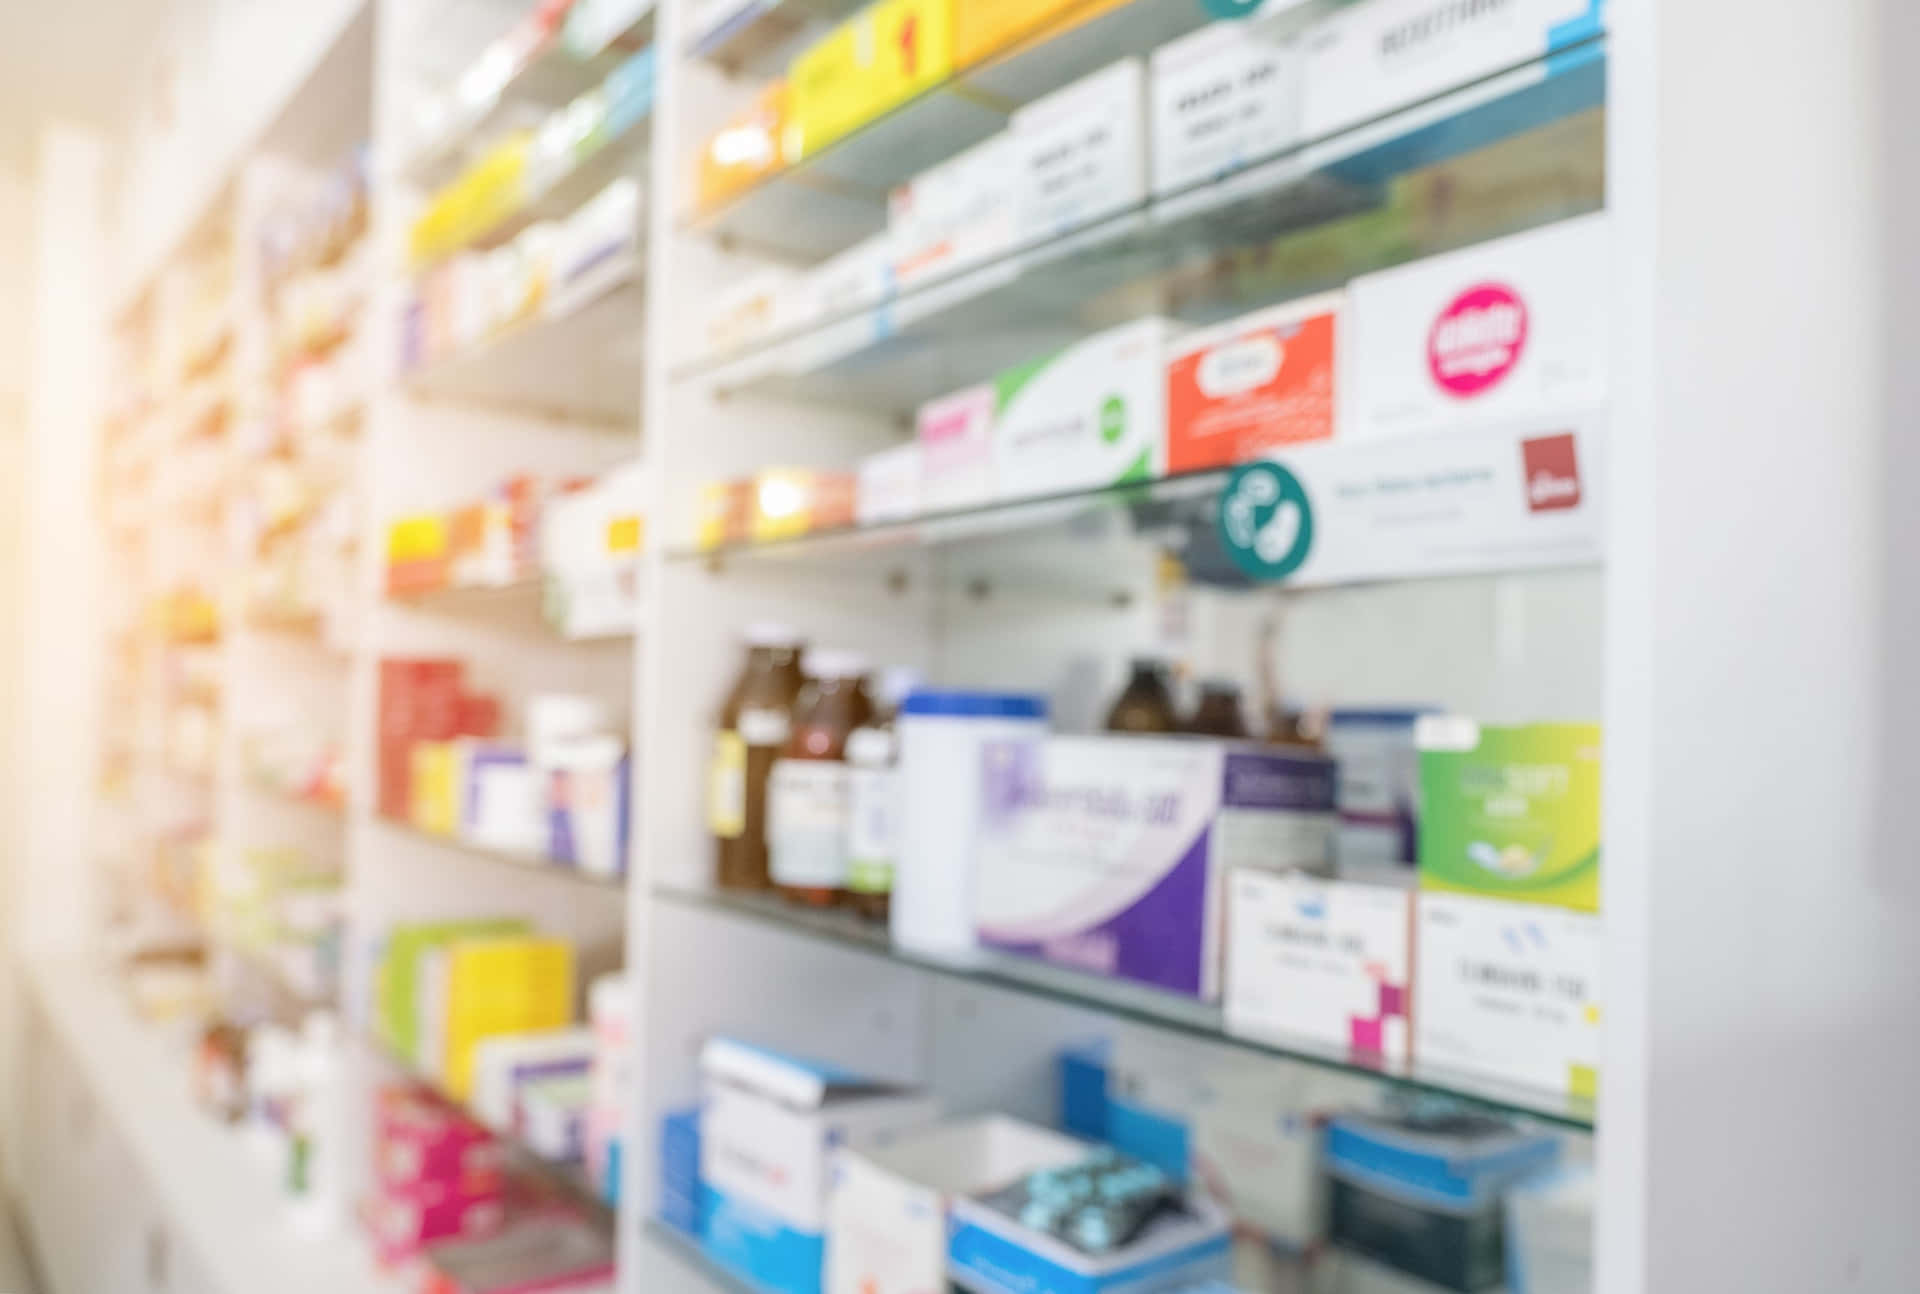 Pharmacy Shelves With Medicine And Medicine Bottles